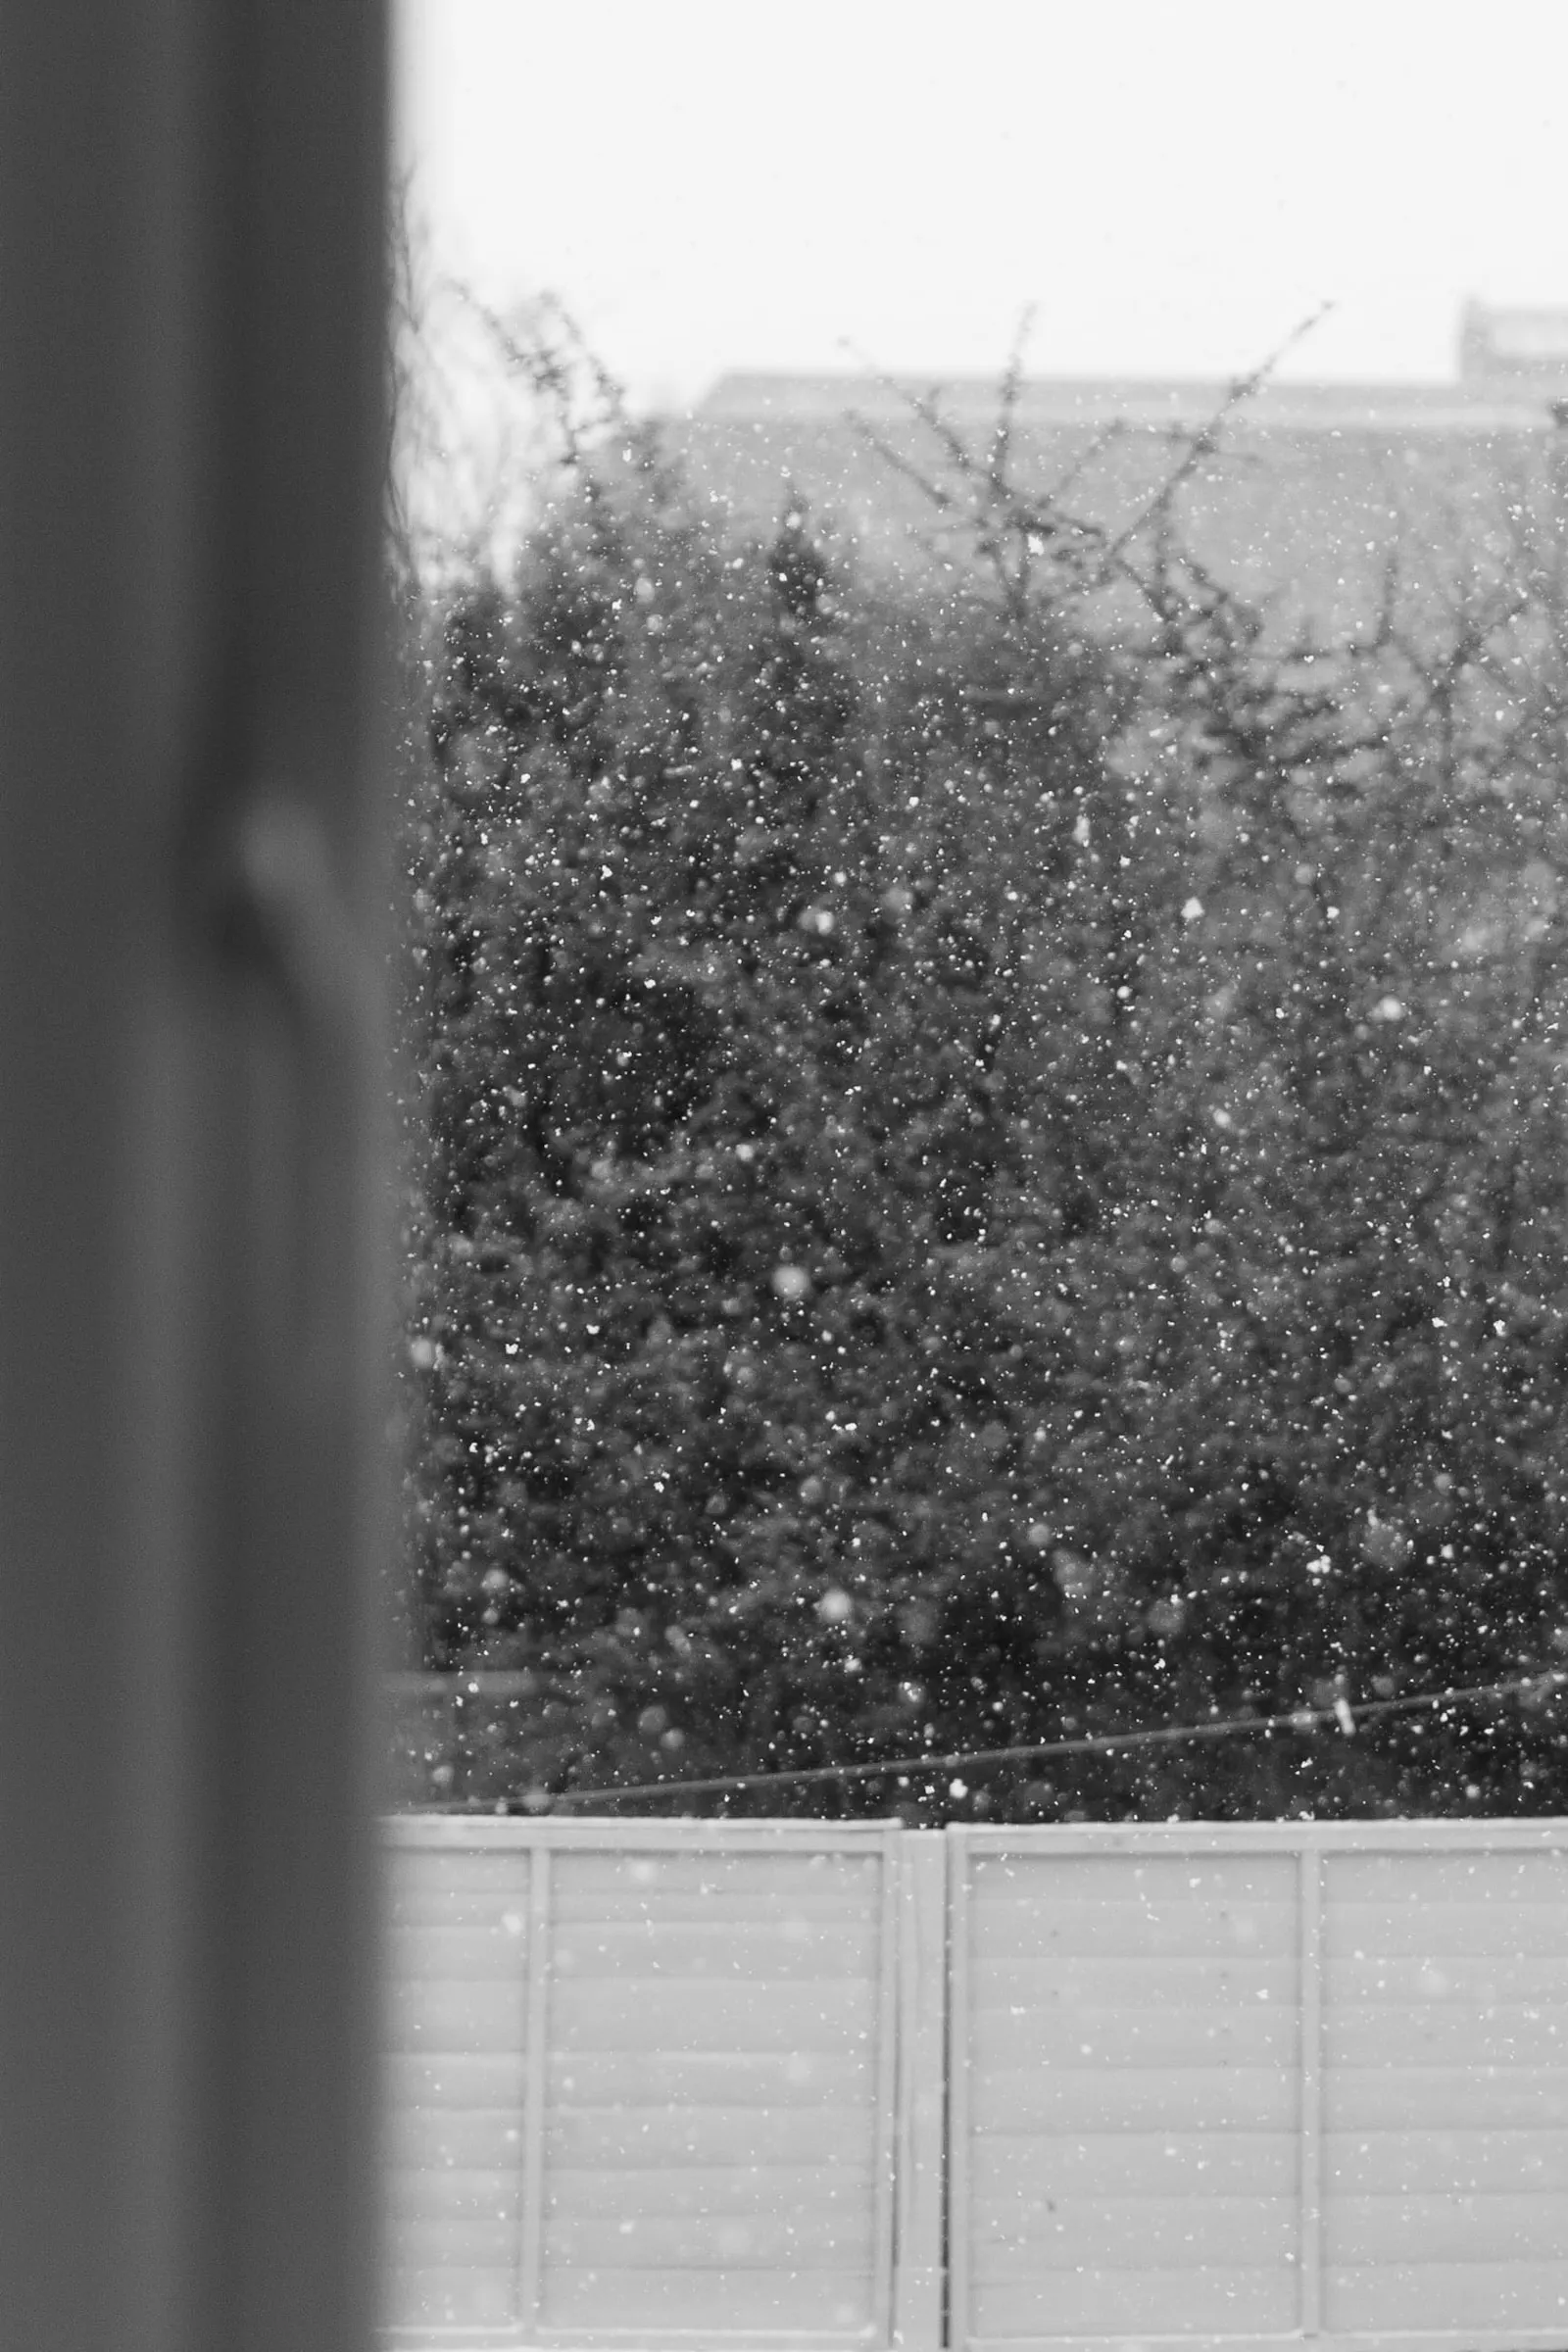 A look out of a window. Outside it is snowing